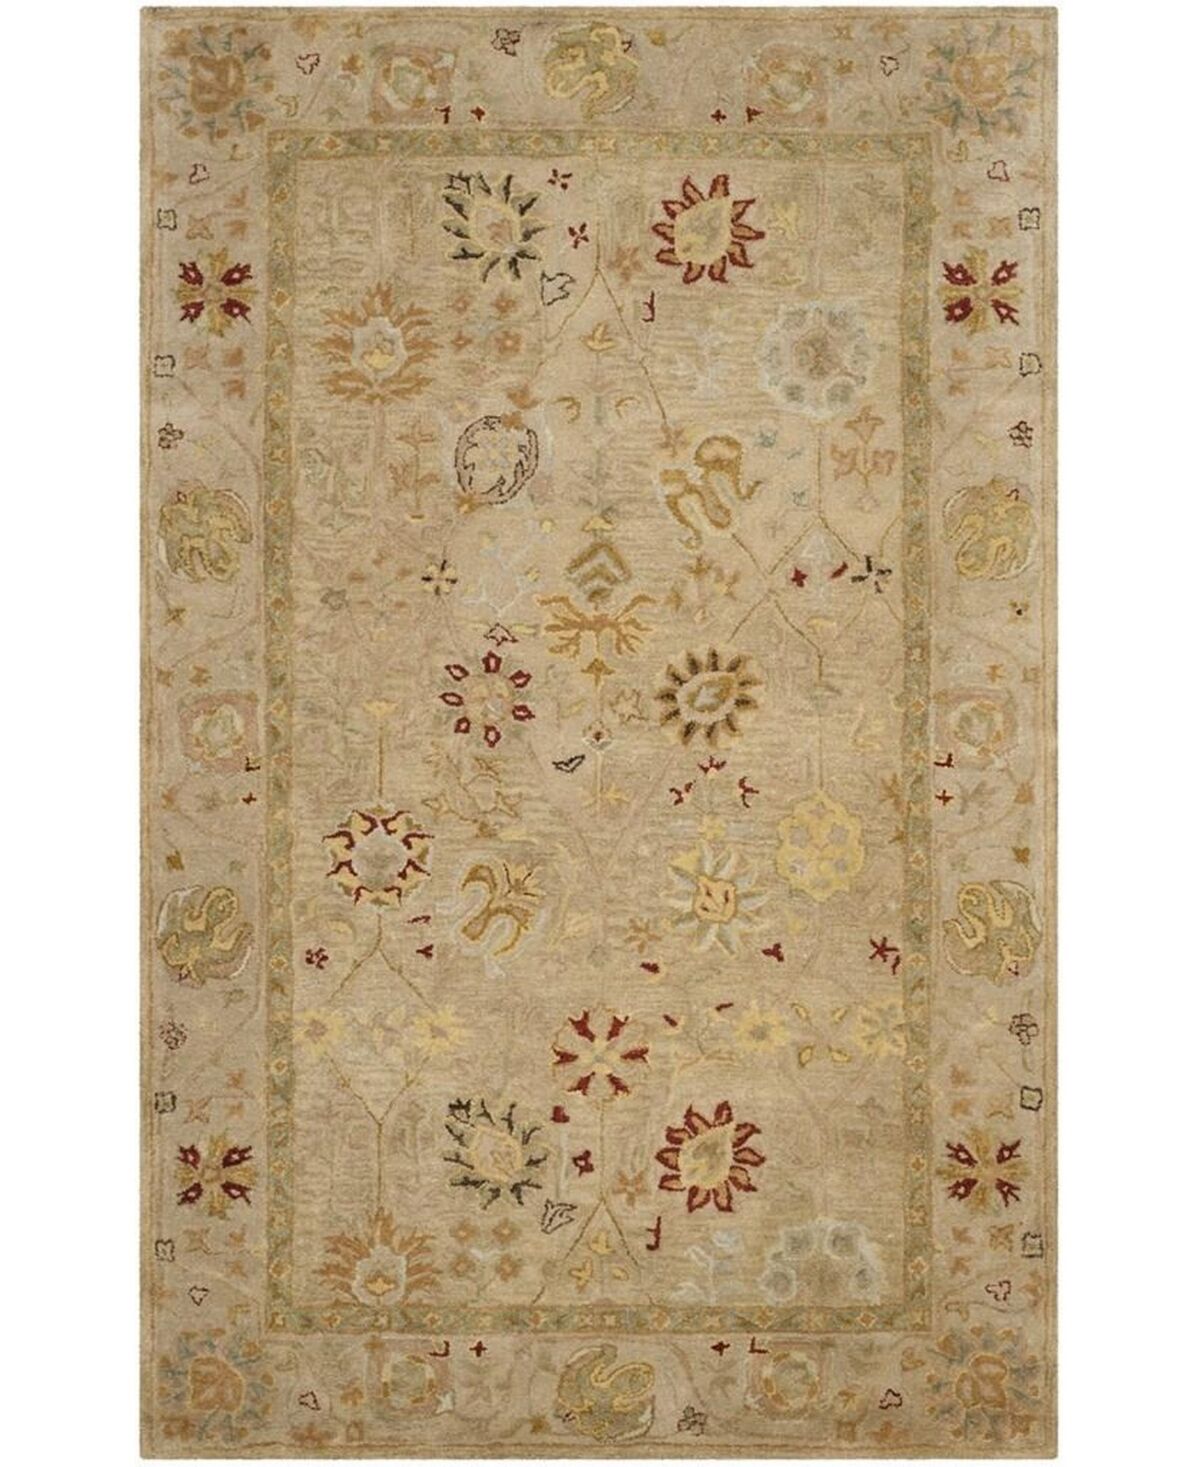 Safavieh Antiquity At859 Taupe 6' x 9' Area Rug - Taupe